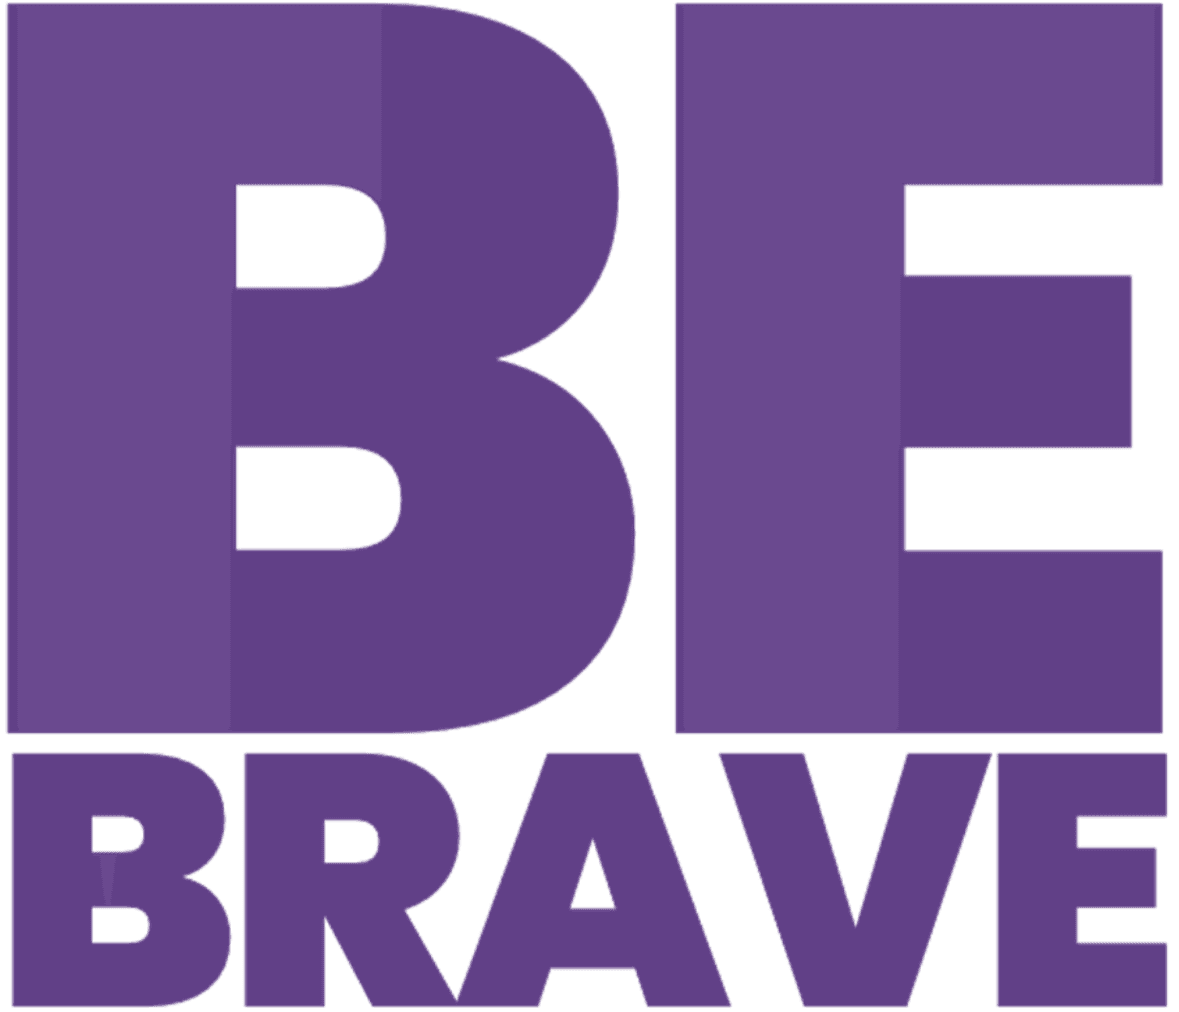 A logo of value be brave